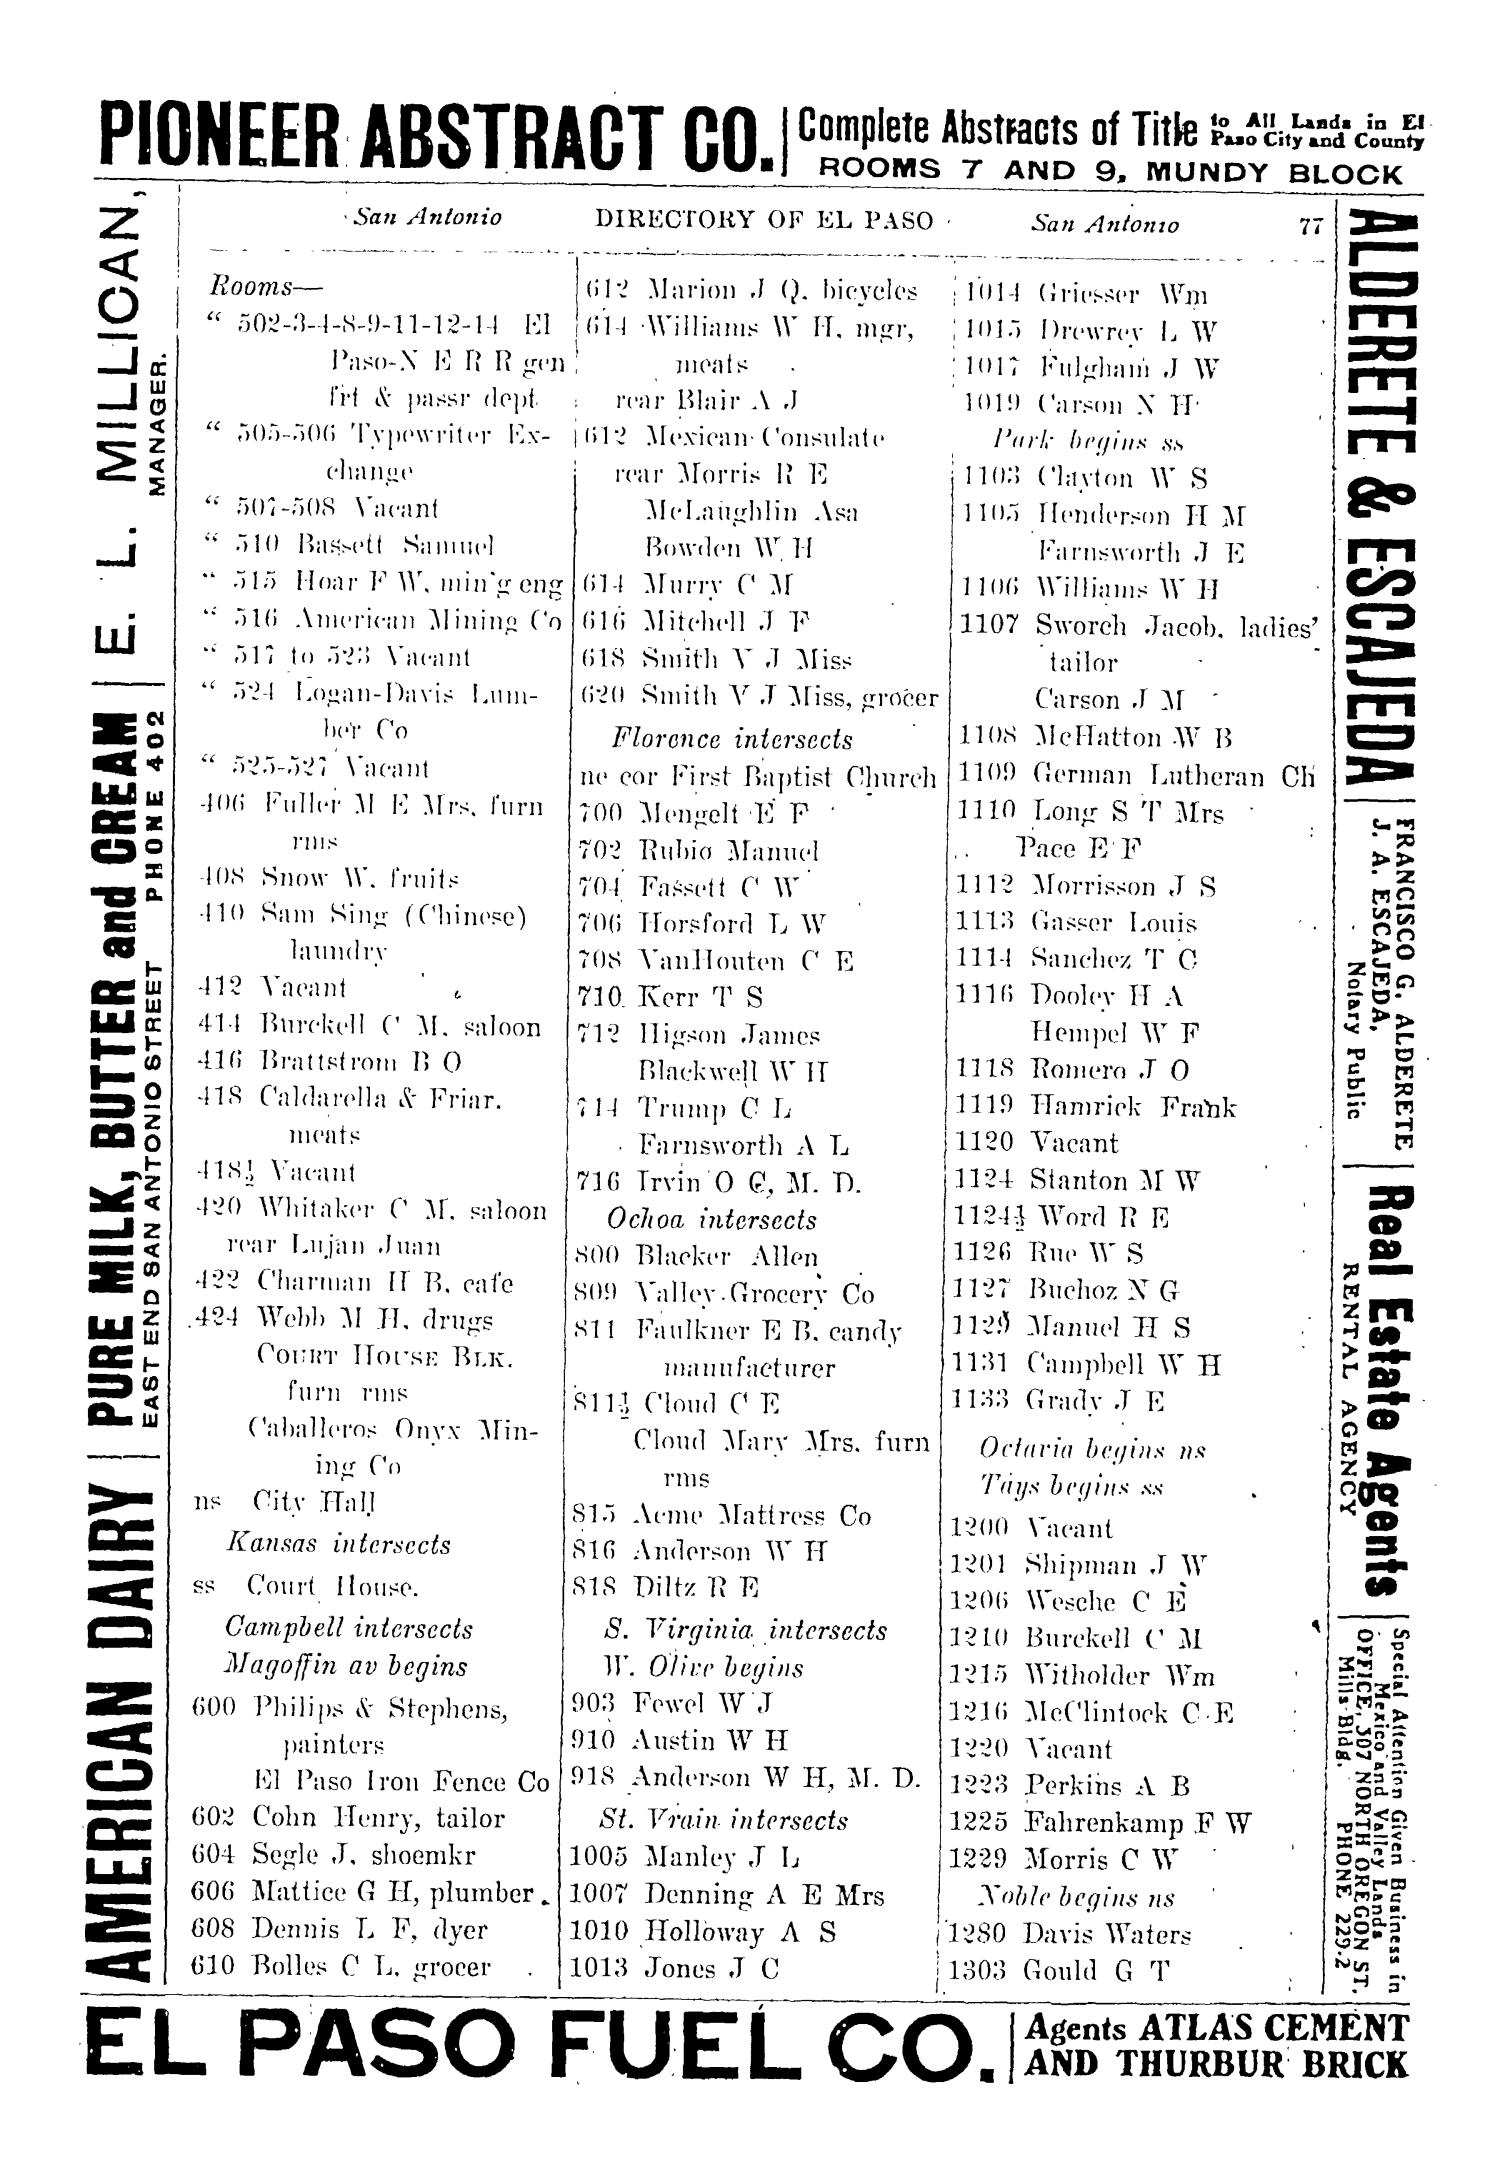 John F. Worley & Co.'s El Paso Directory for 1905
                                                
                                                    77
                                                